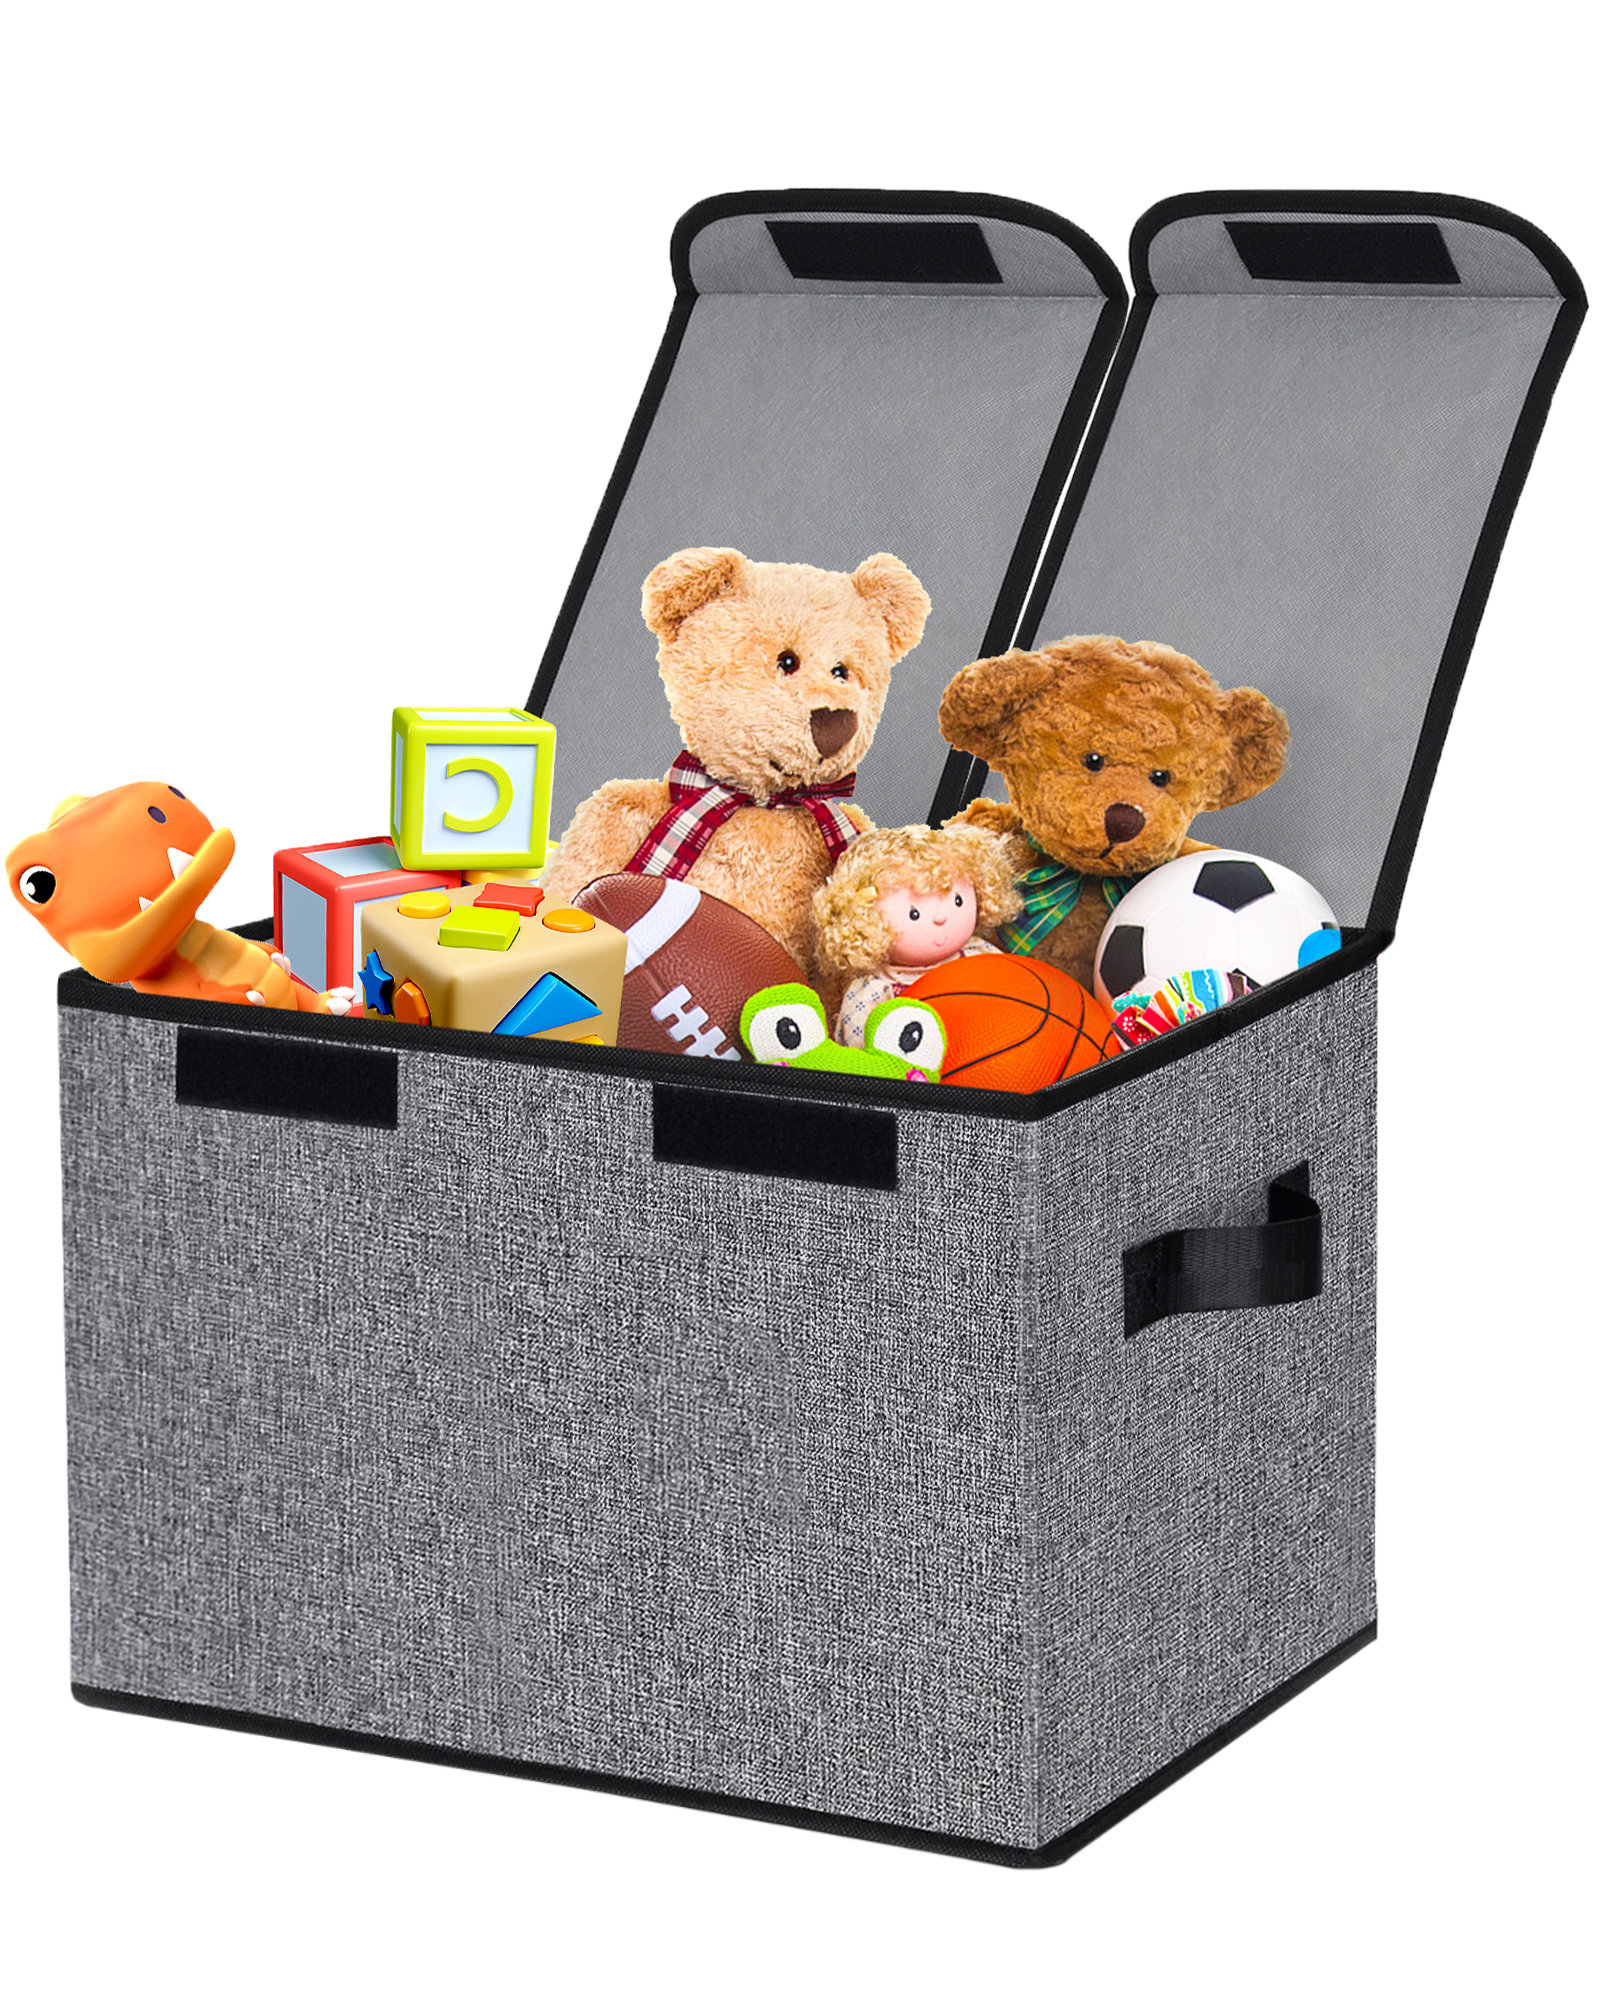 TEAYINGDE 91L Large Toy Box Chest Storage Organizer with Lid, Collapsible Kids Toys Boxes Basket Bins with Sturdy Handles for Boys and Girls, Nursery, Playroom (Gray) - image 1 of 8